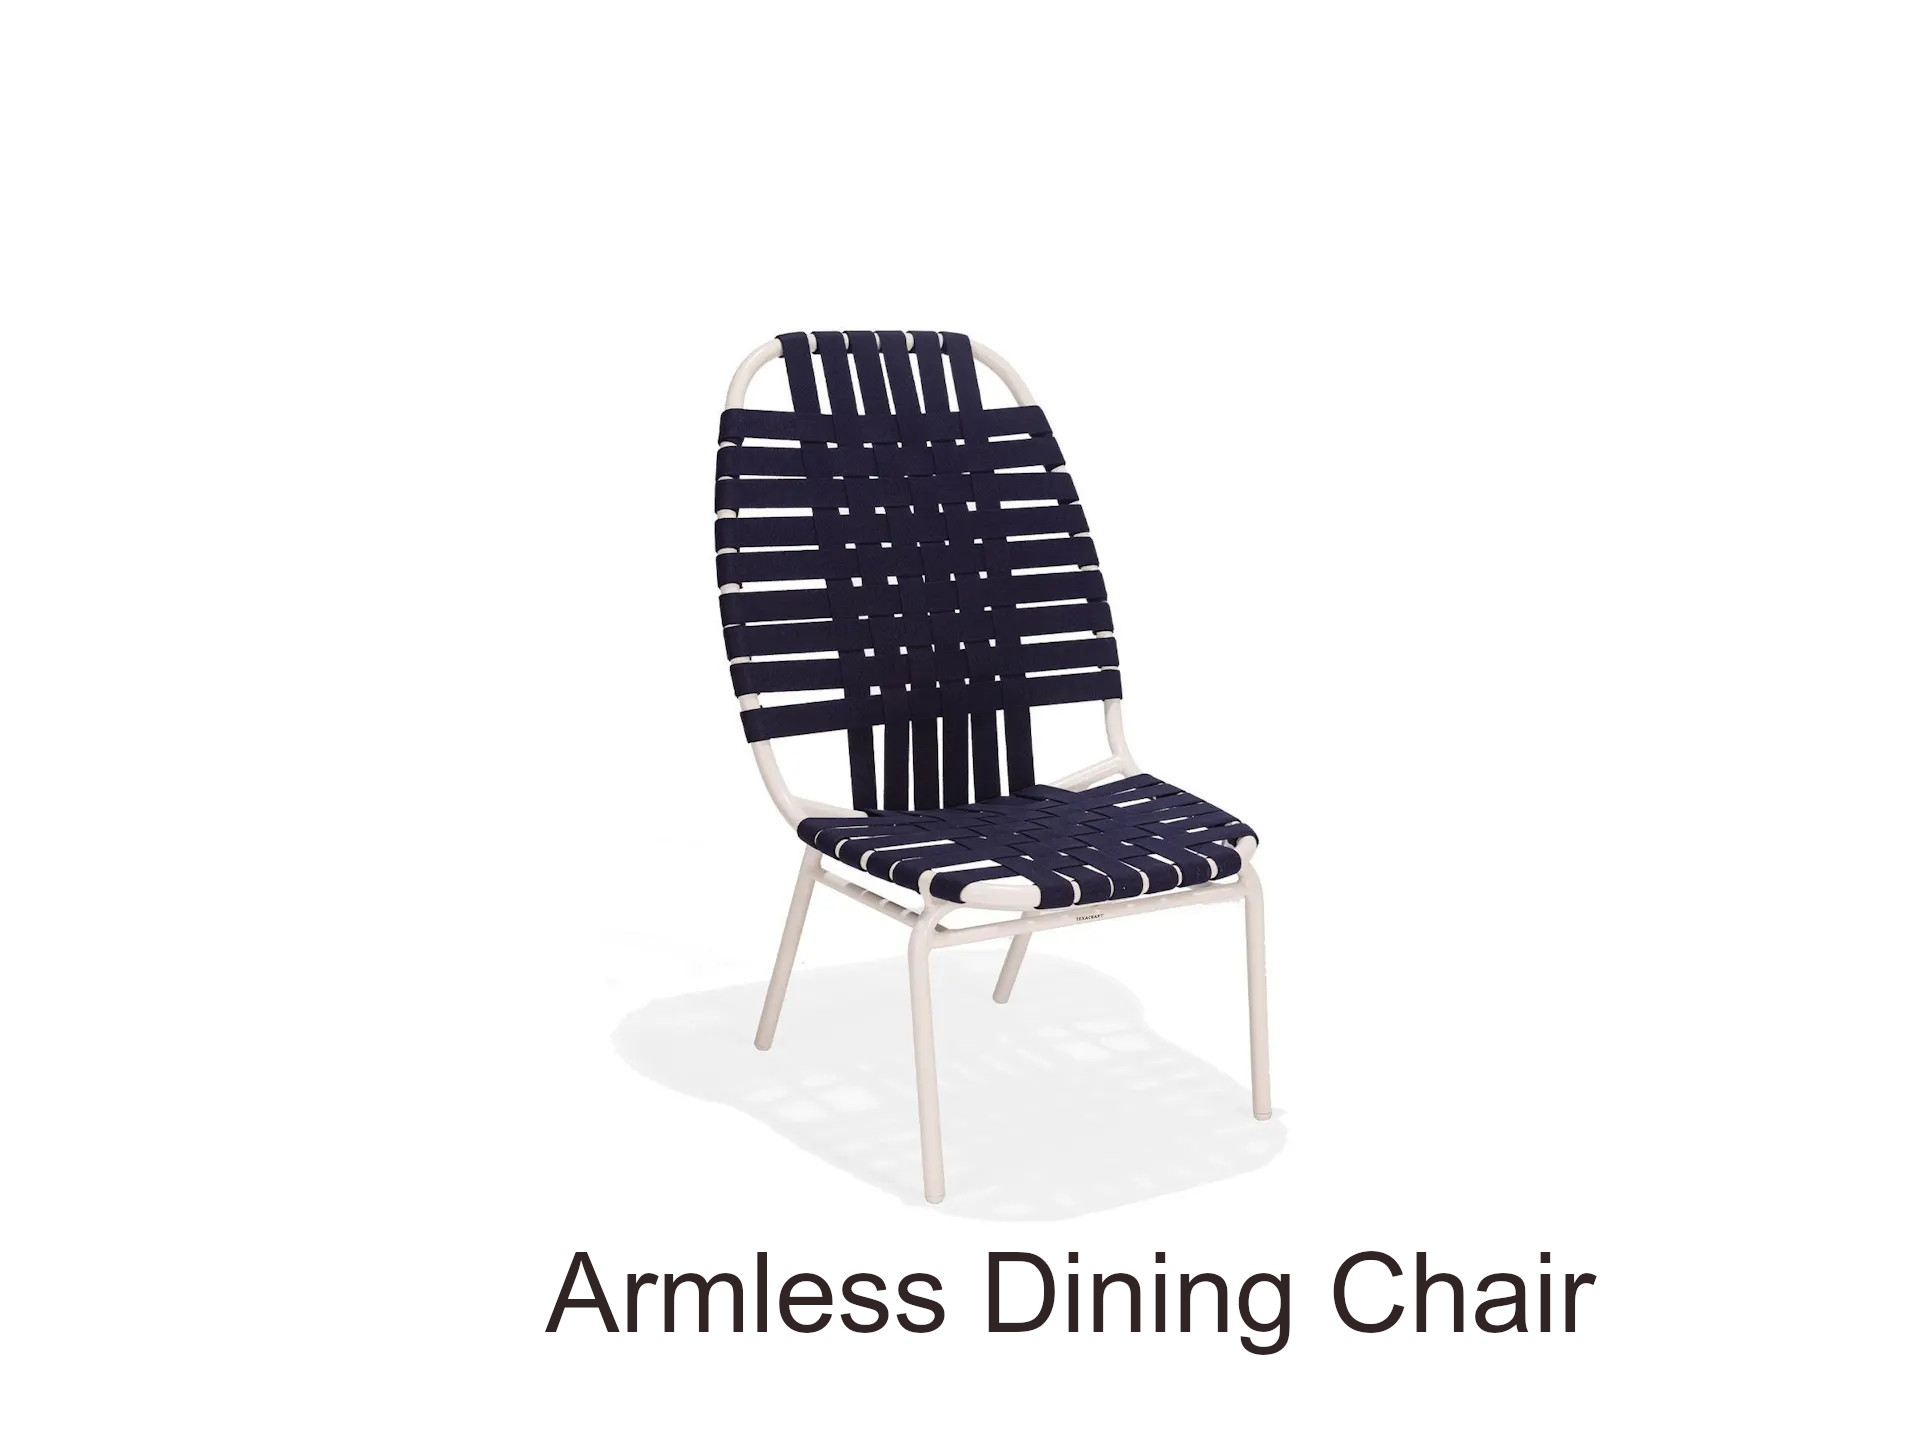 Surf Suncloth Weave Collection Armless Dining Chair